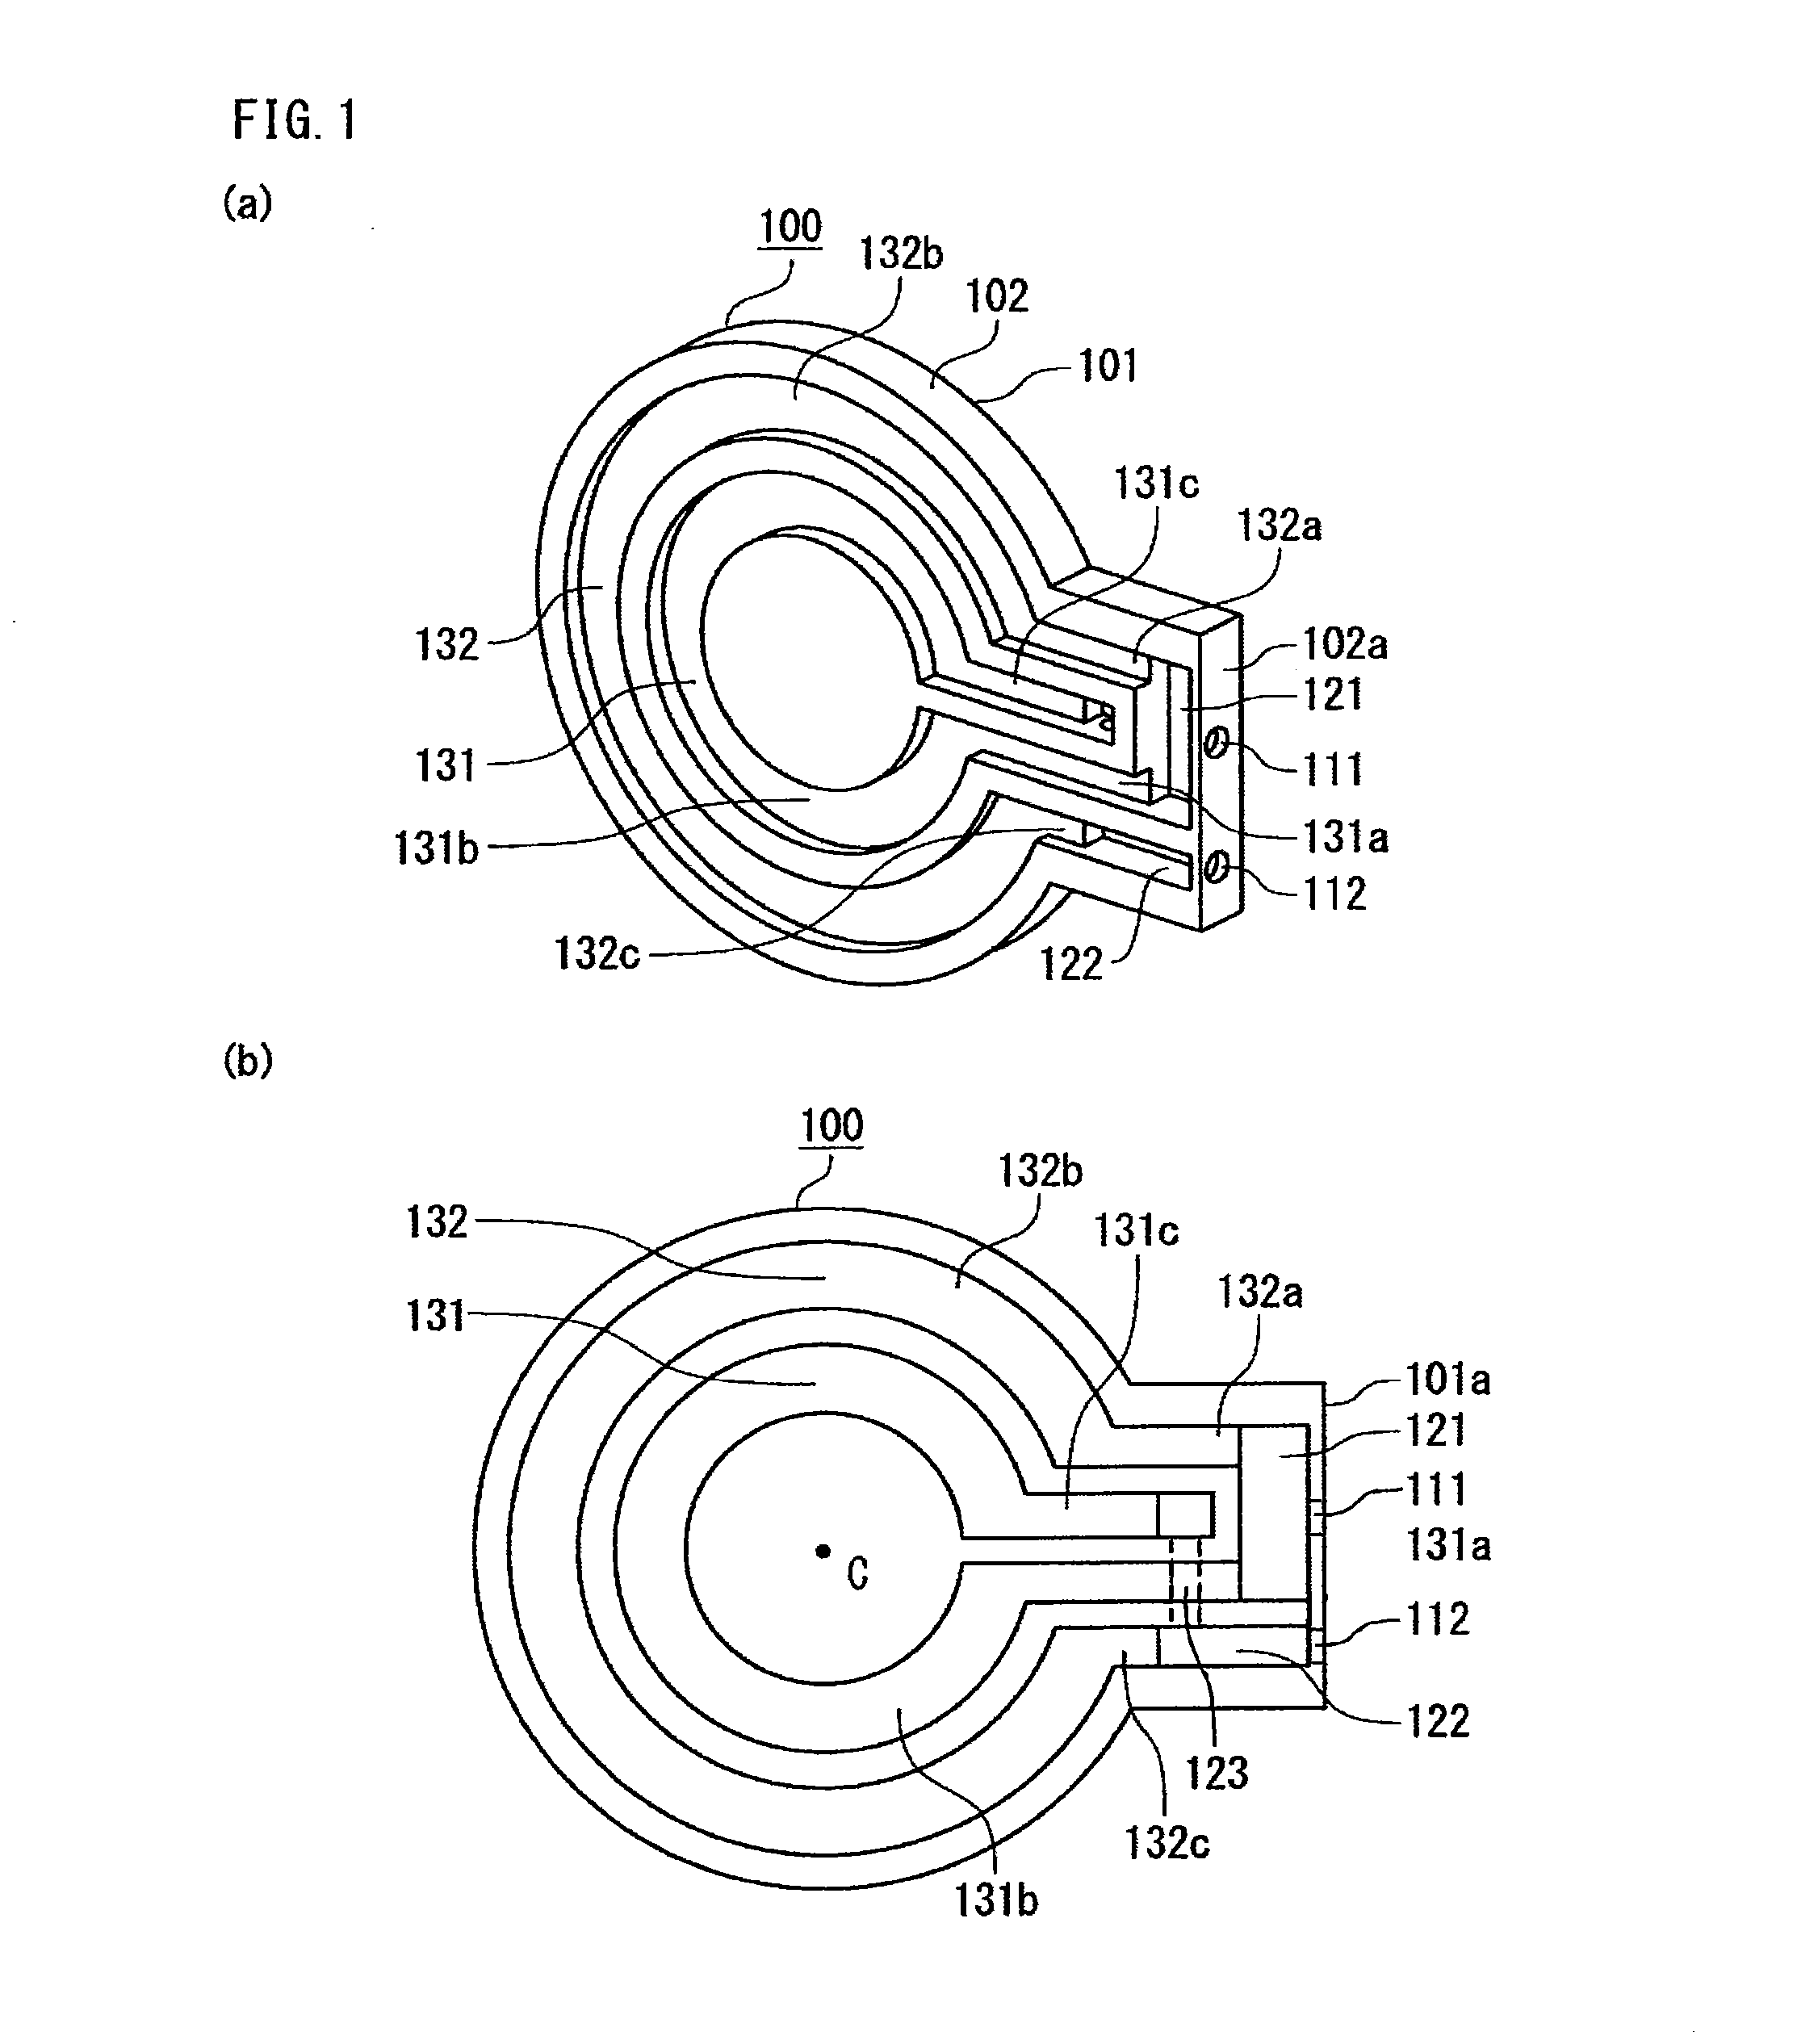 Cooler and motor-integrated power conversion apparatus